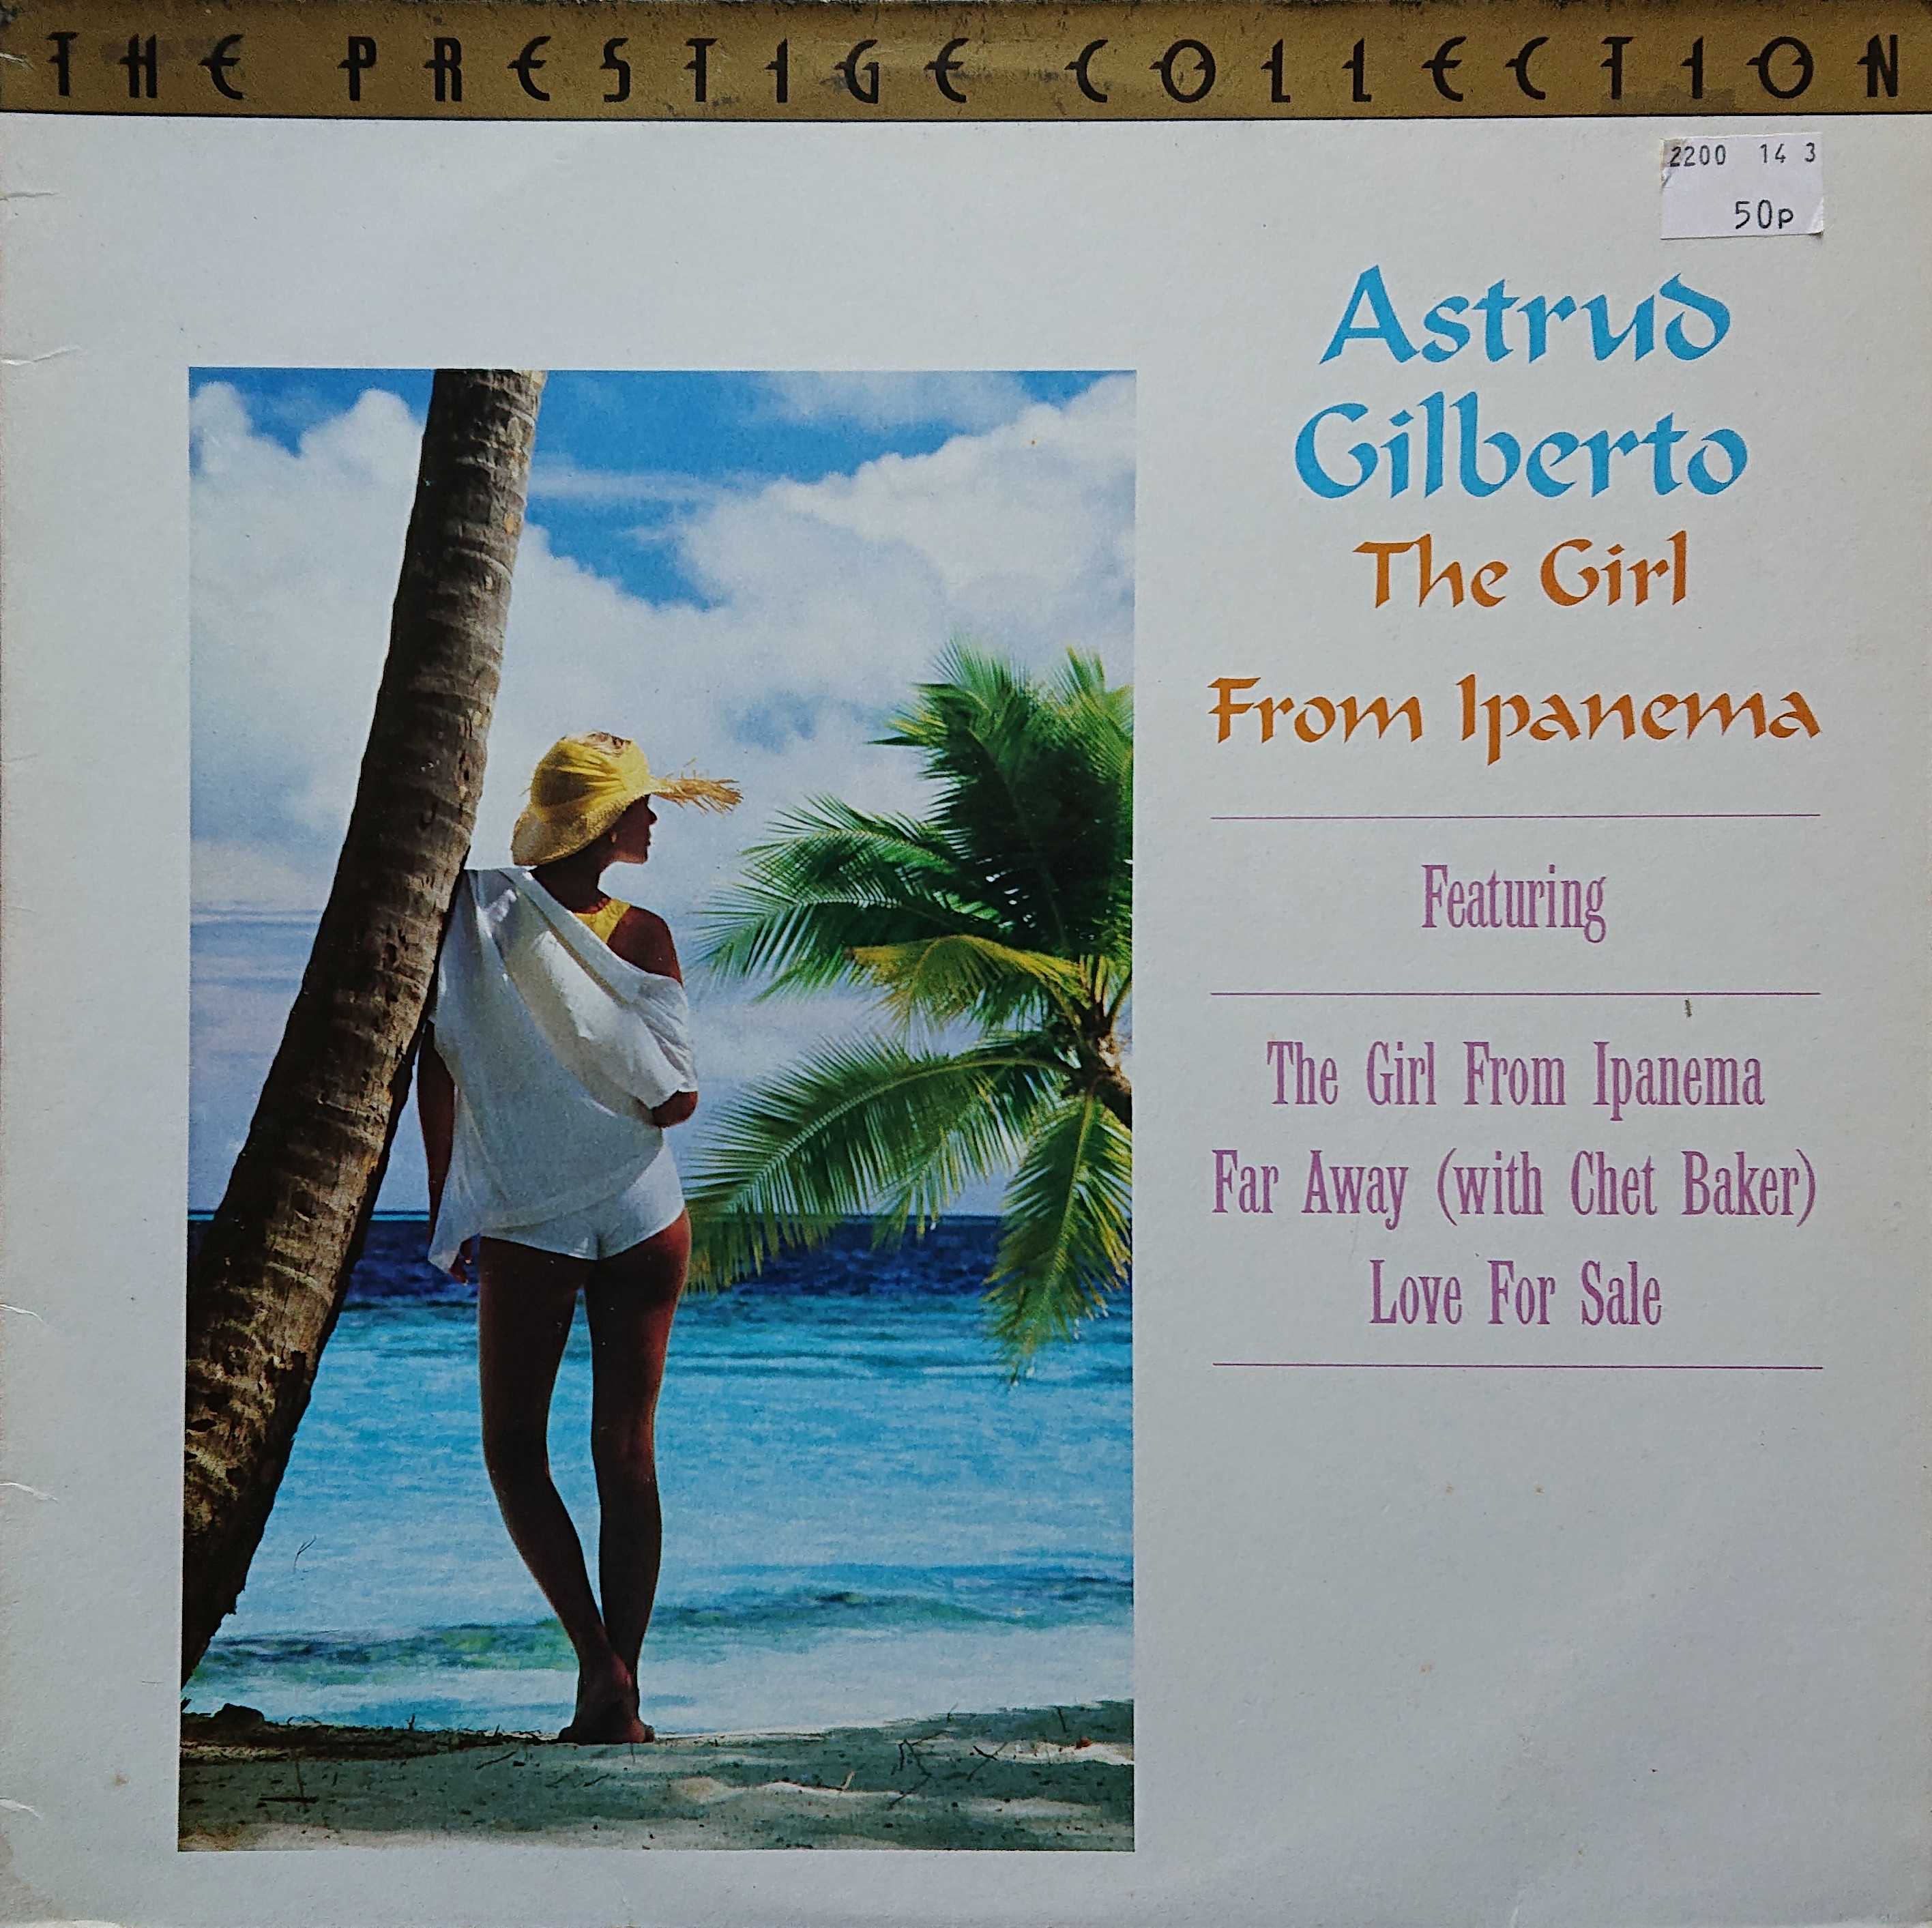 Picture of The girl from Ipanema by artist Astrud Gilberto from the BBC albums - Records and Tapes library